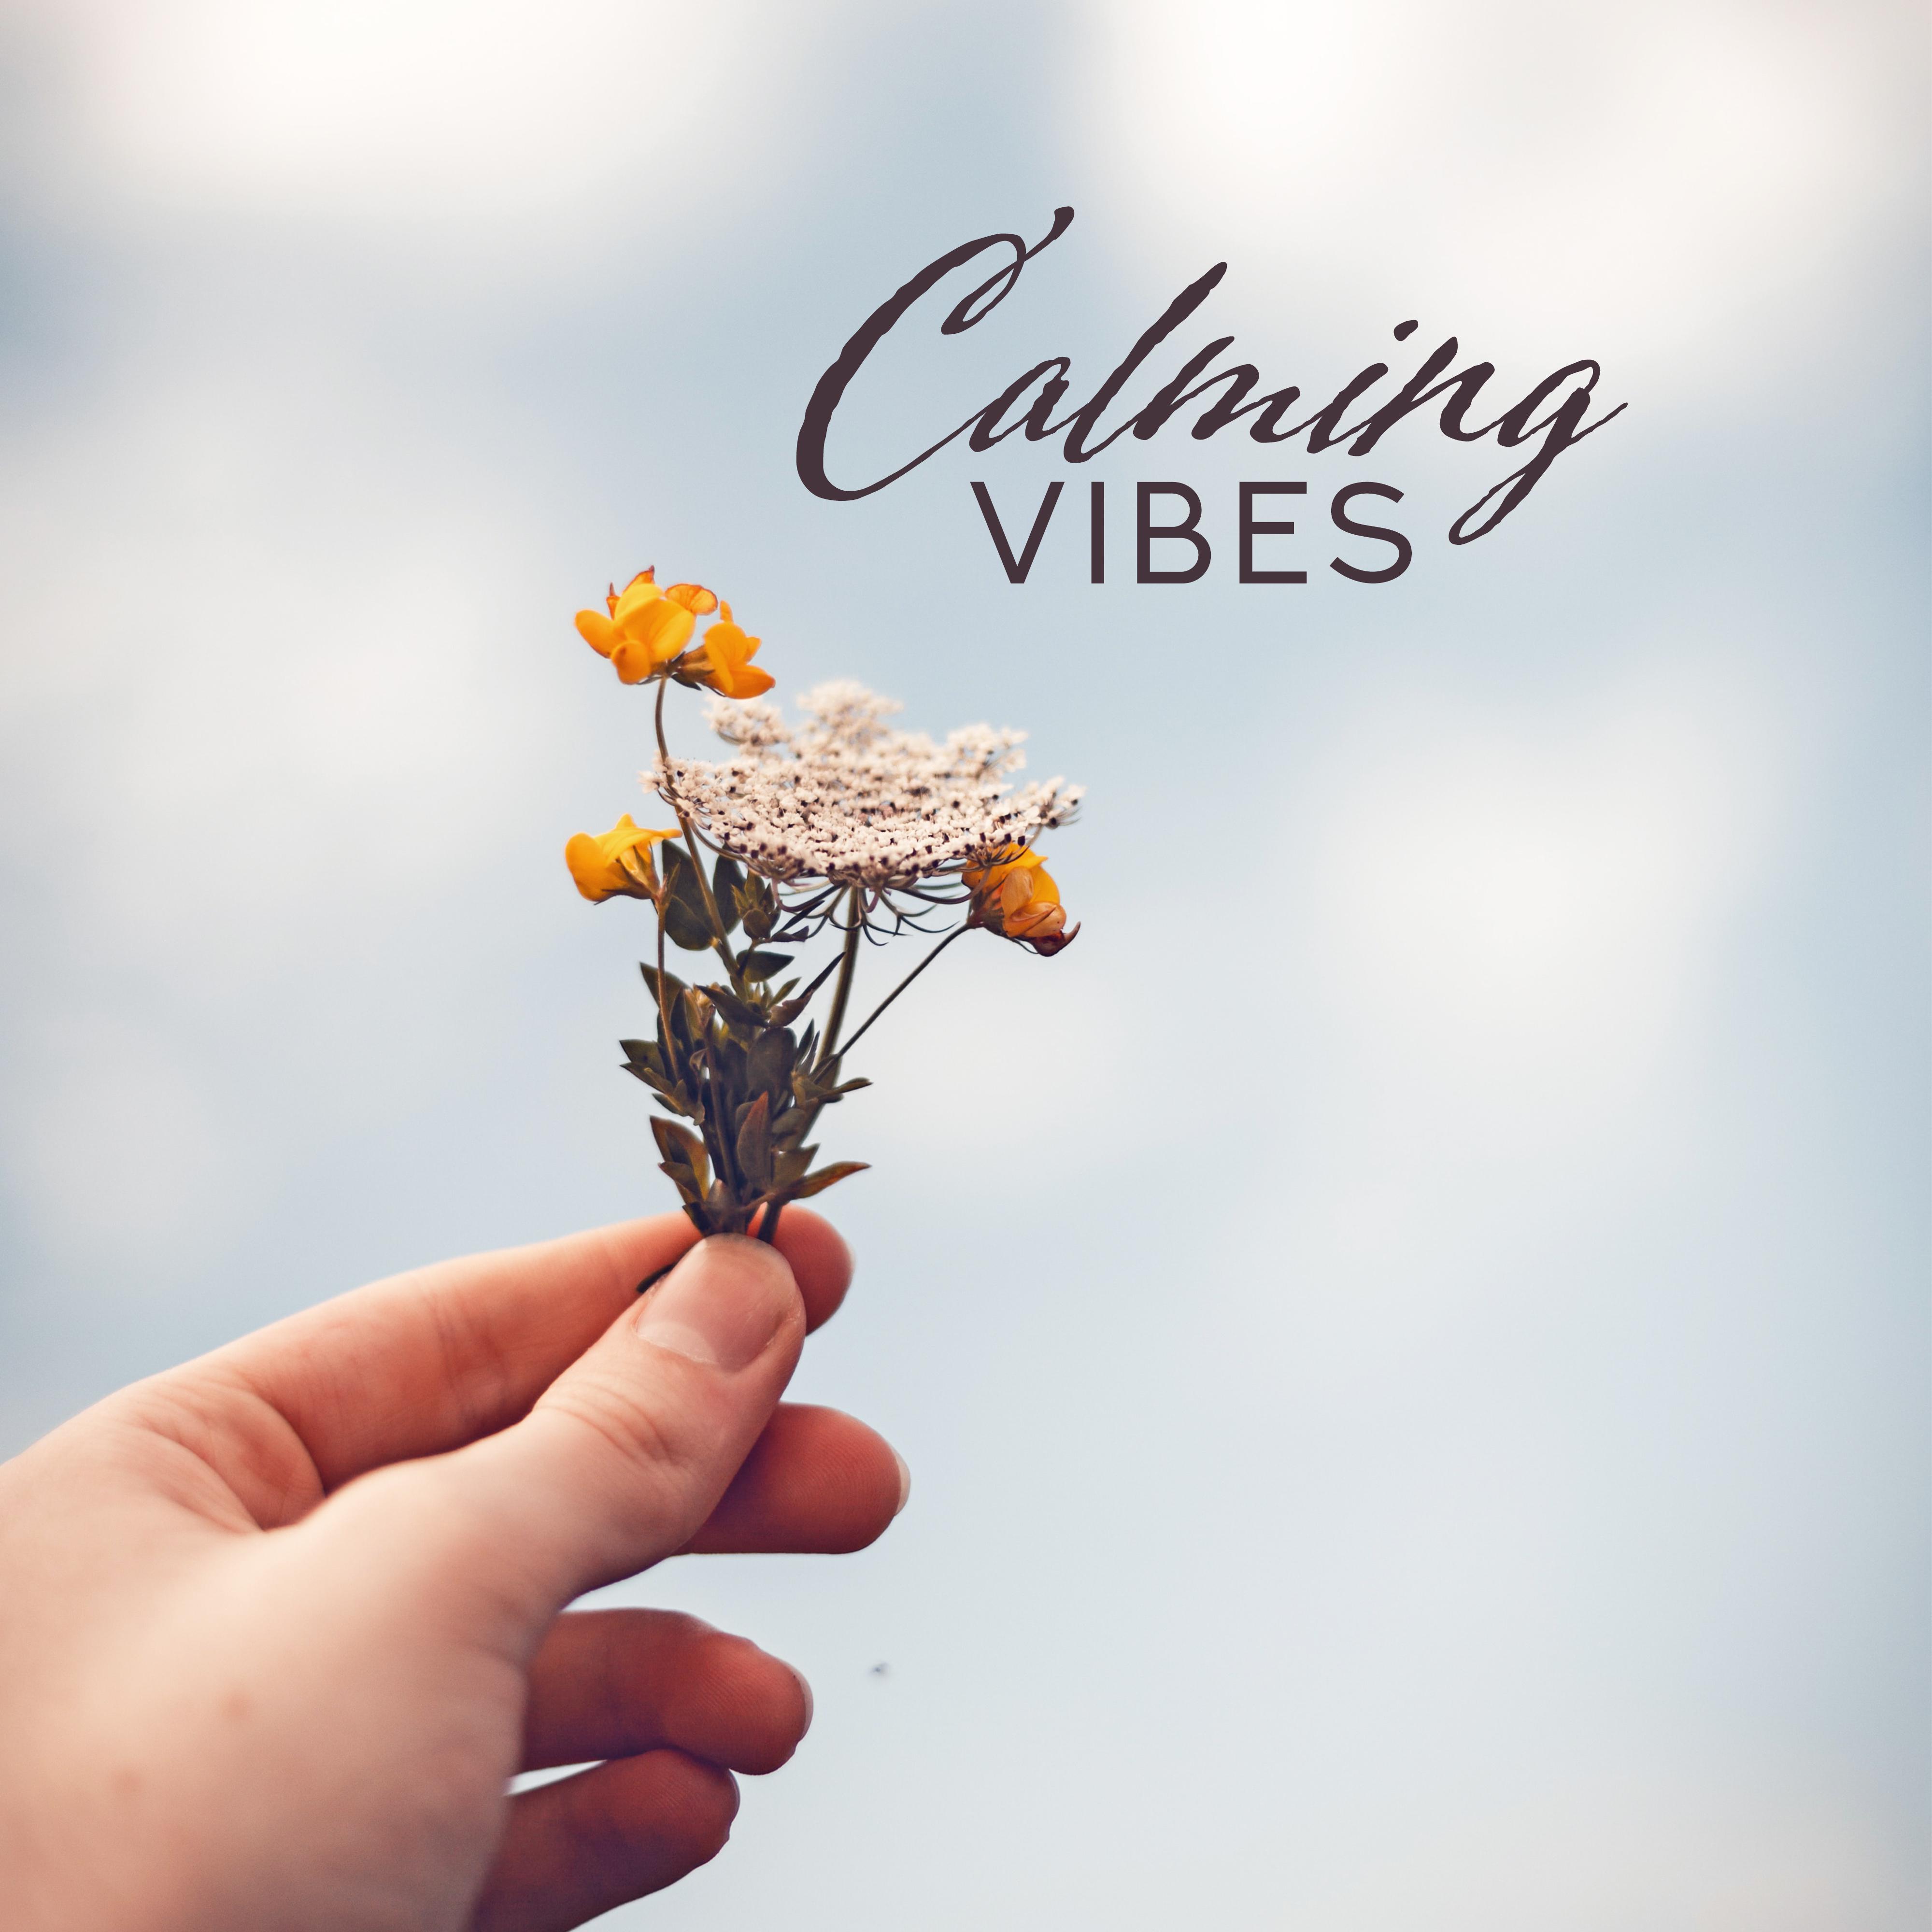 Calming Vibes: Stress Relieving Music Chillout for Moments of Relaxation and Respite